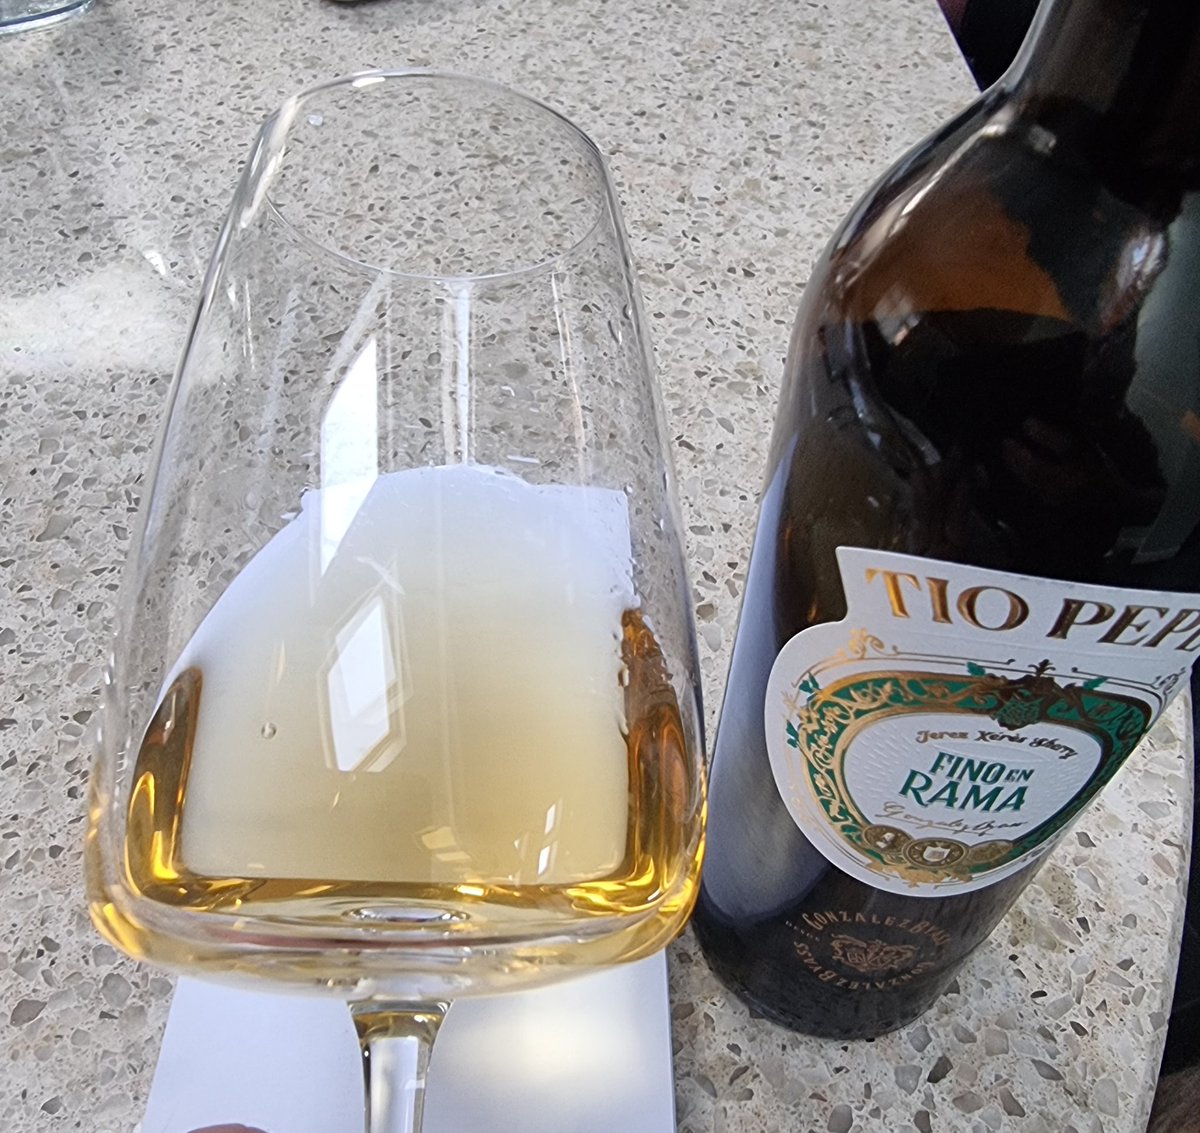 First @TioPepeWine en rama of the 2024 season. Darker colour than the 23 iteration, with a really applely nose. Almonds and bag loads of salinity on the palate. Nice :)